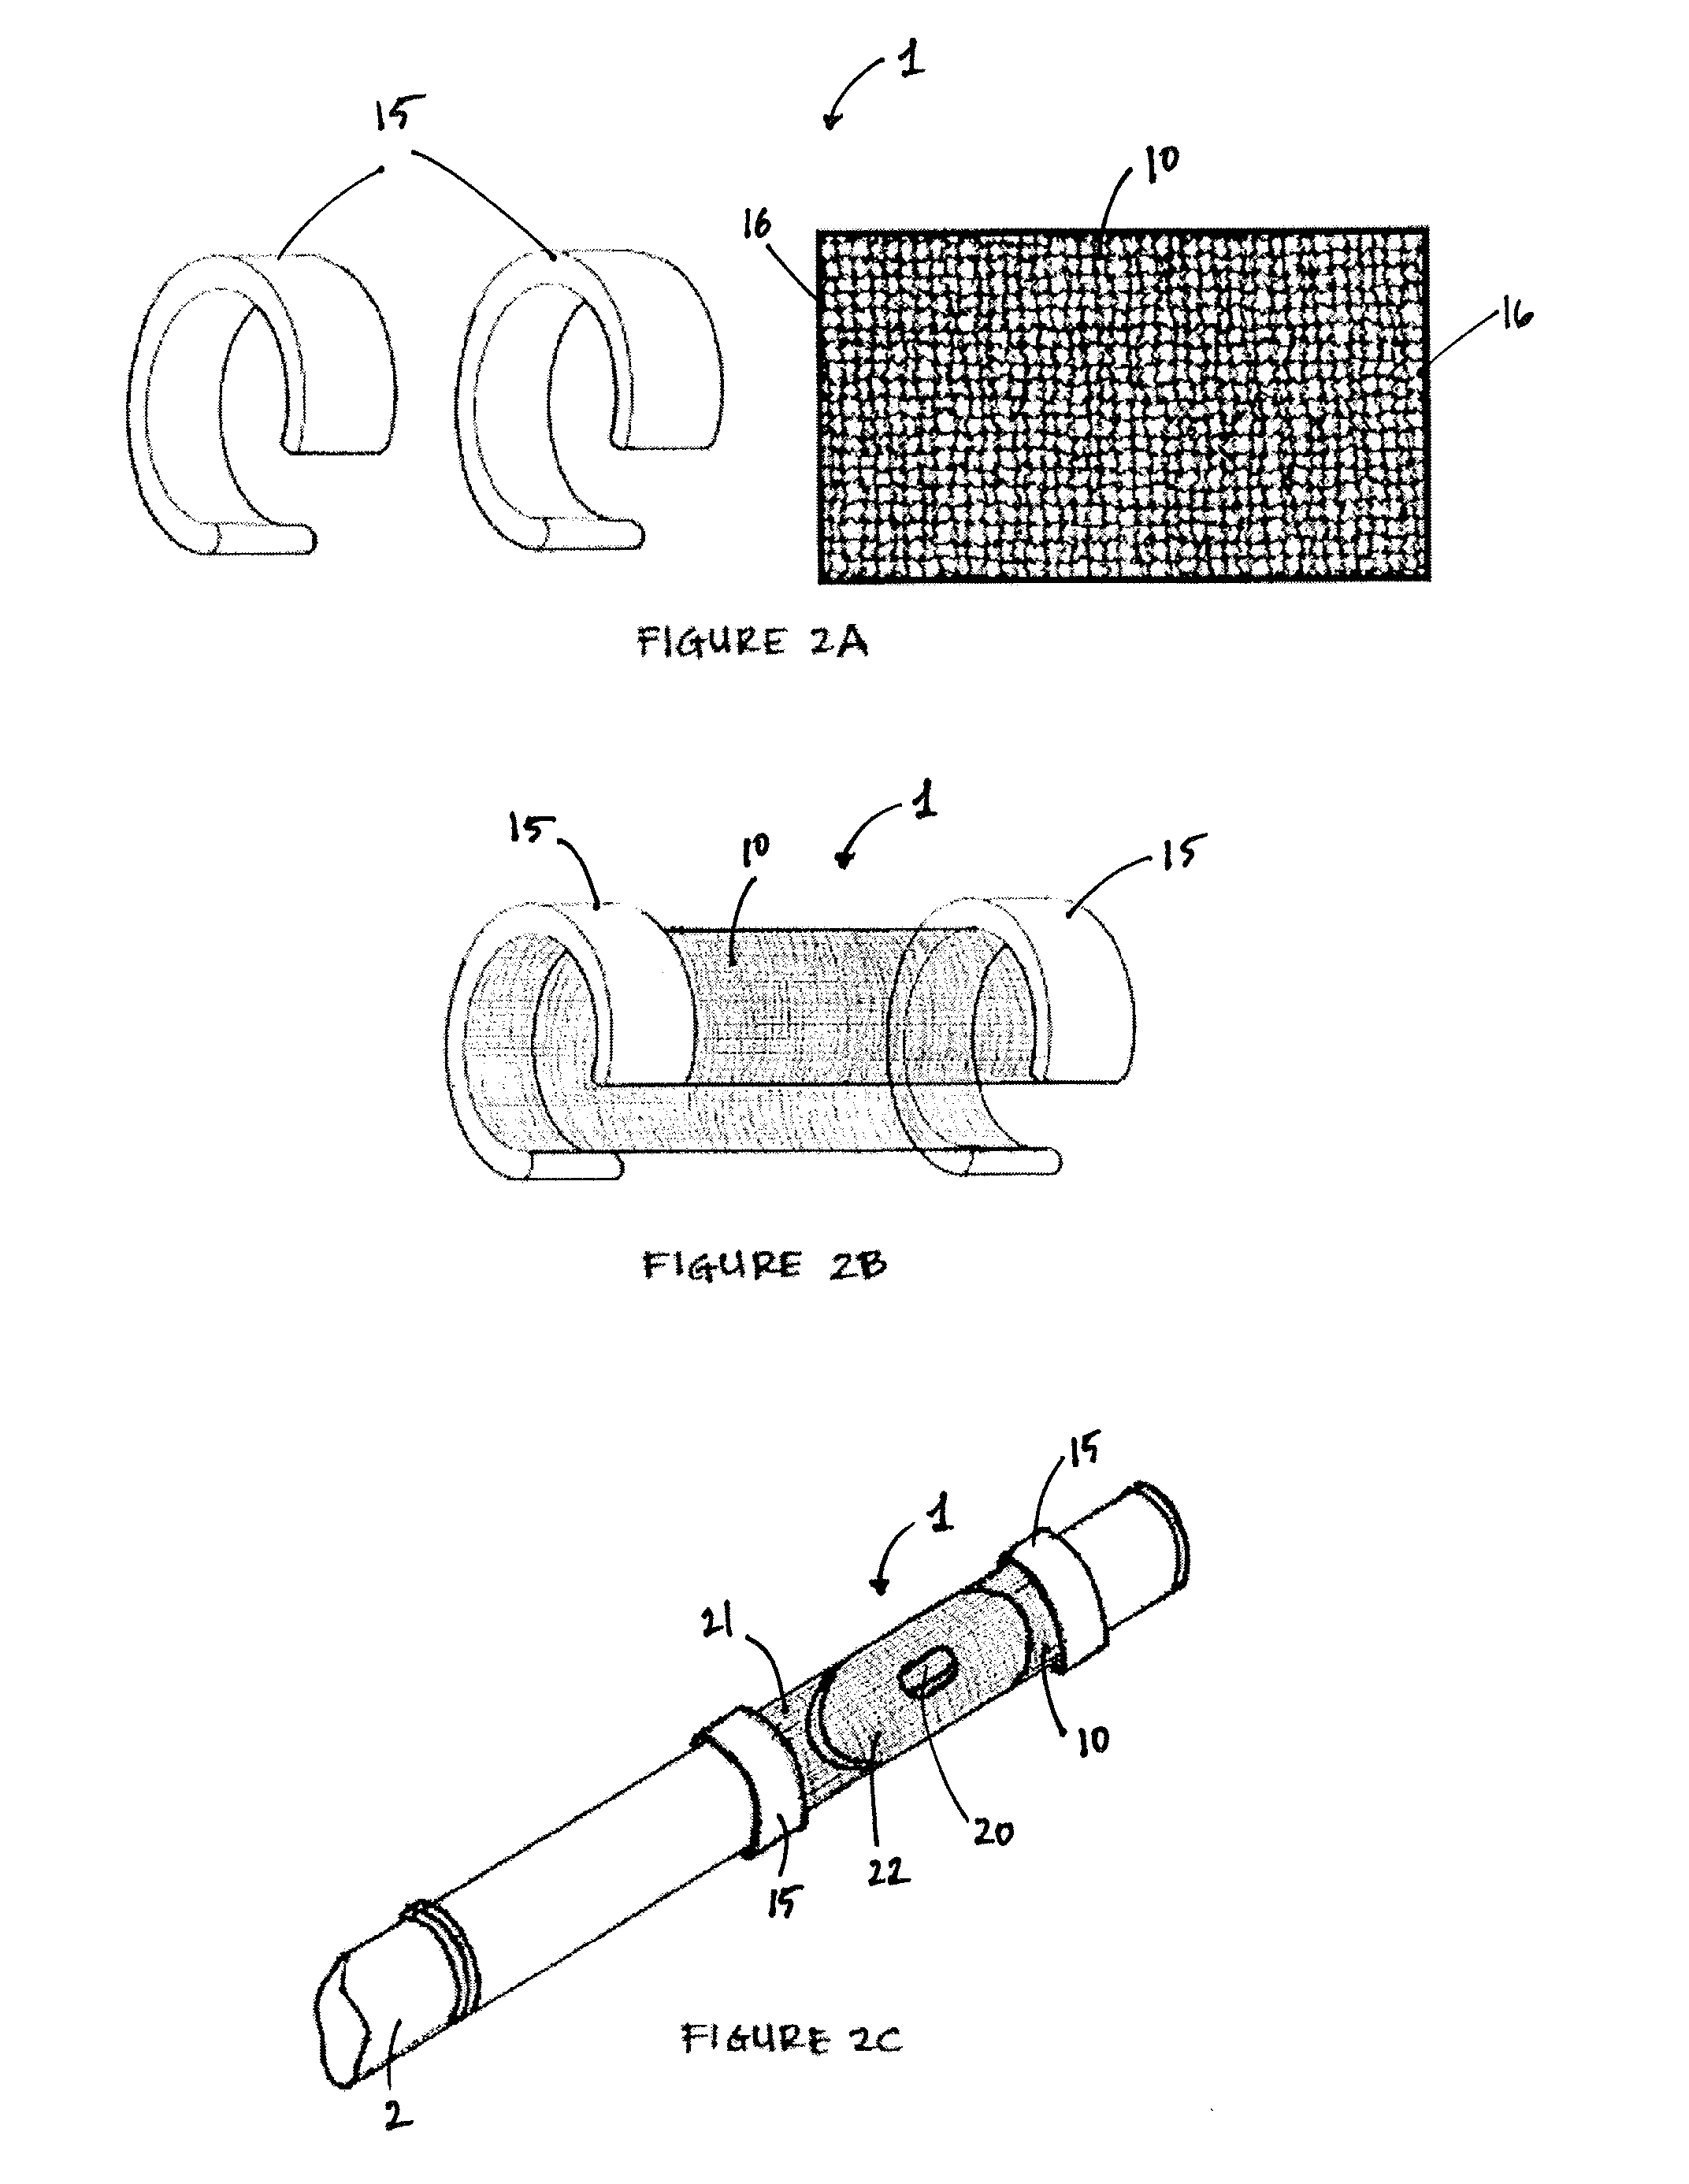 Device for muting the sound of a musical instrument